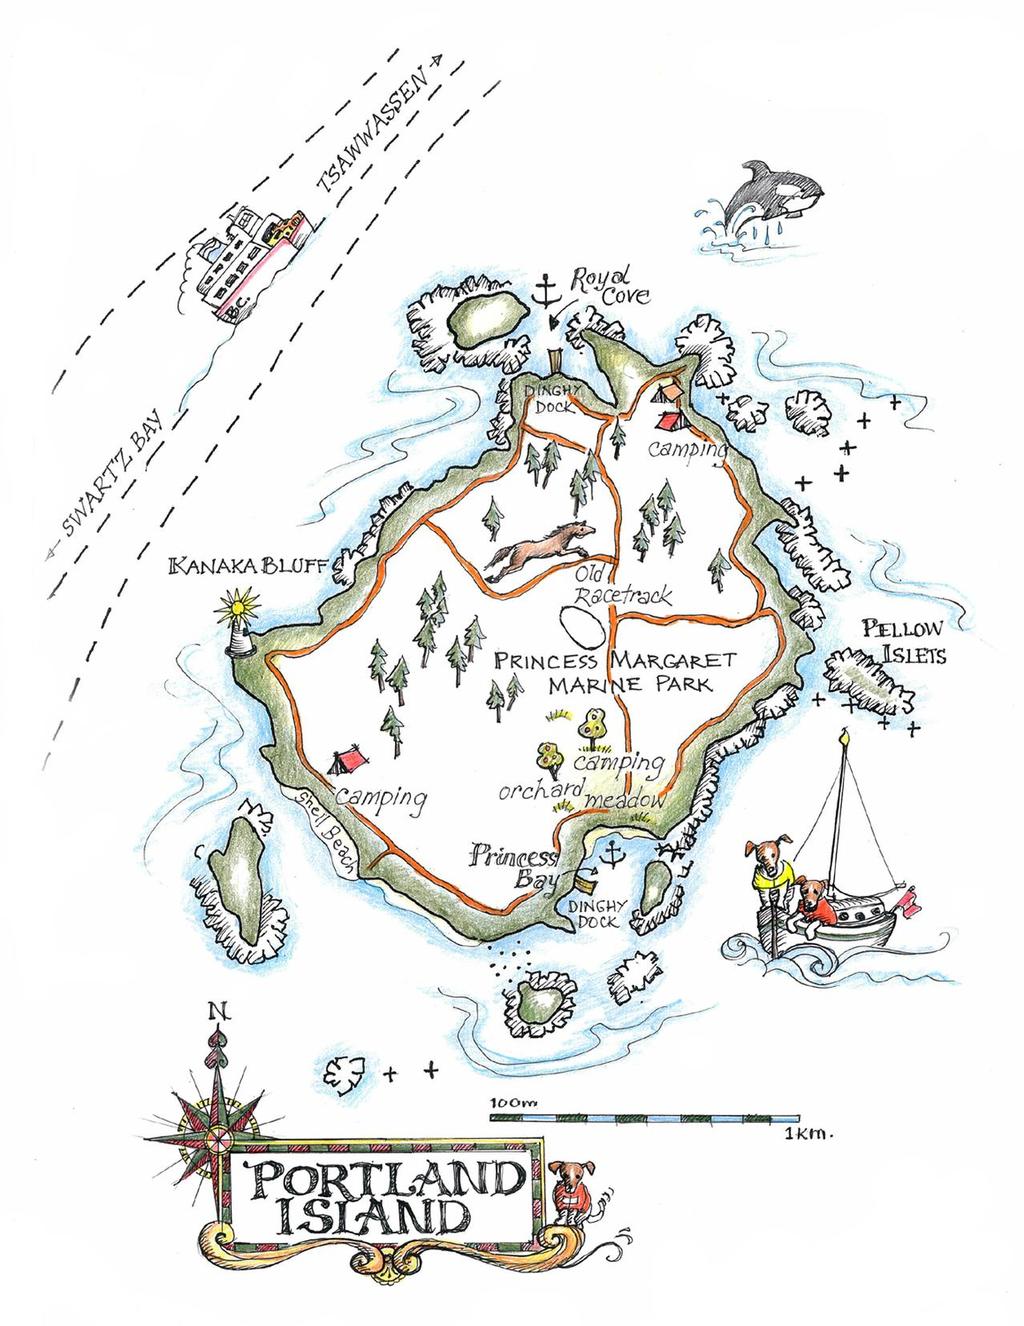 Another of the maps - this one of Portland Island - one of our favourite spots on the coast © Amanda Spottiswoode